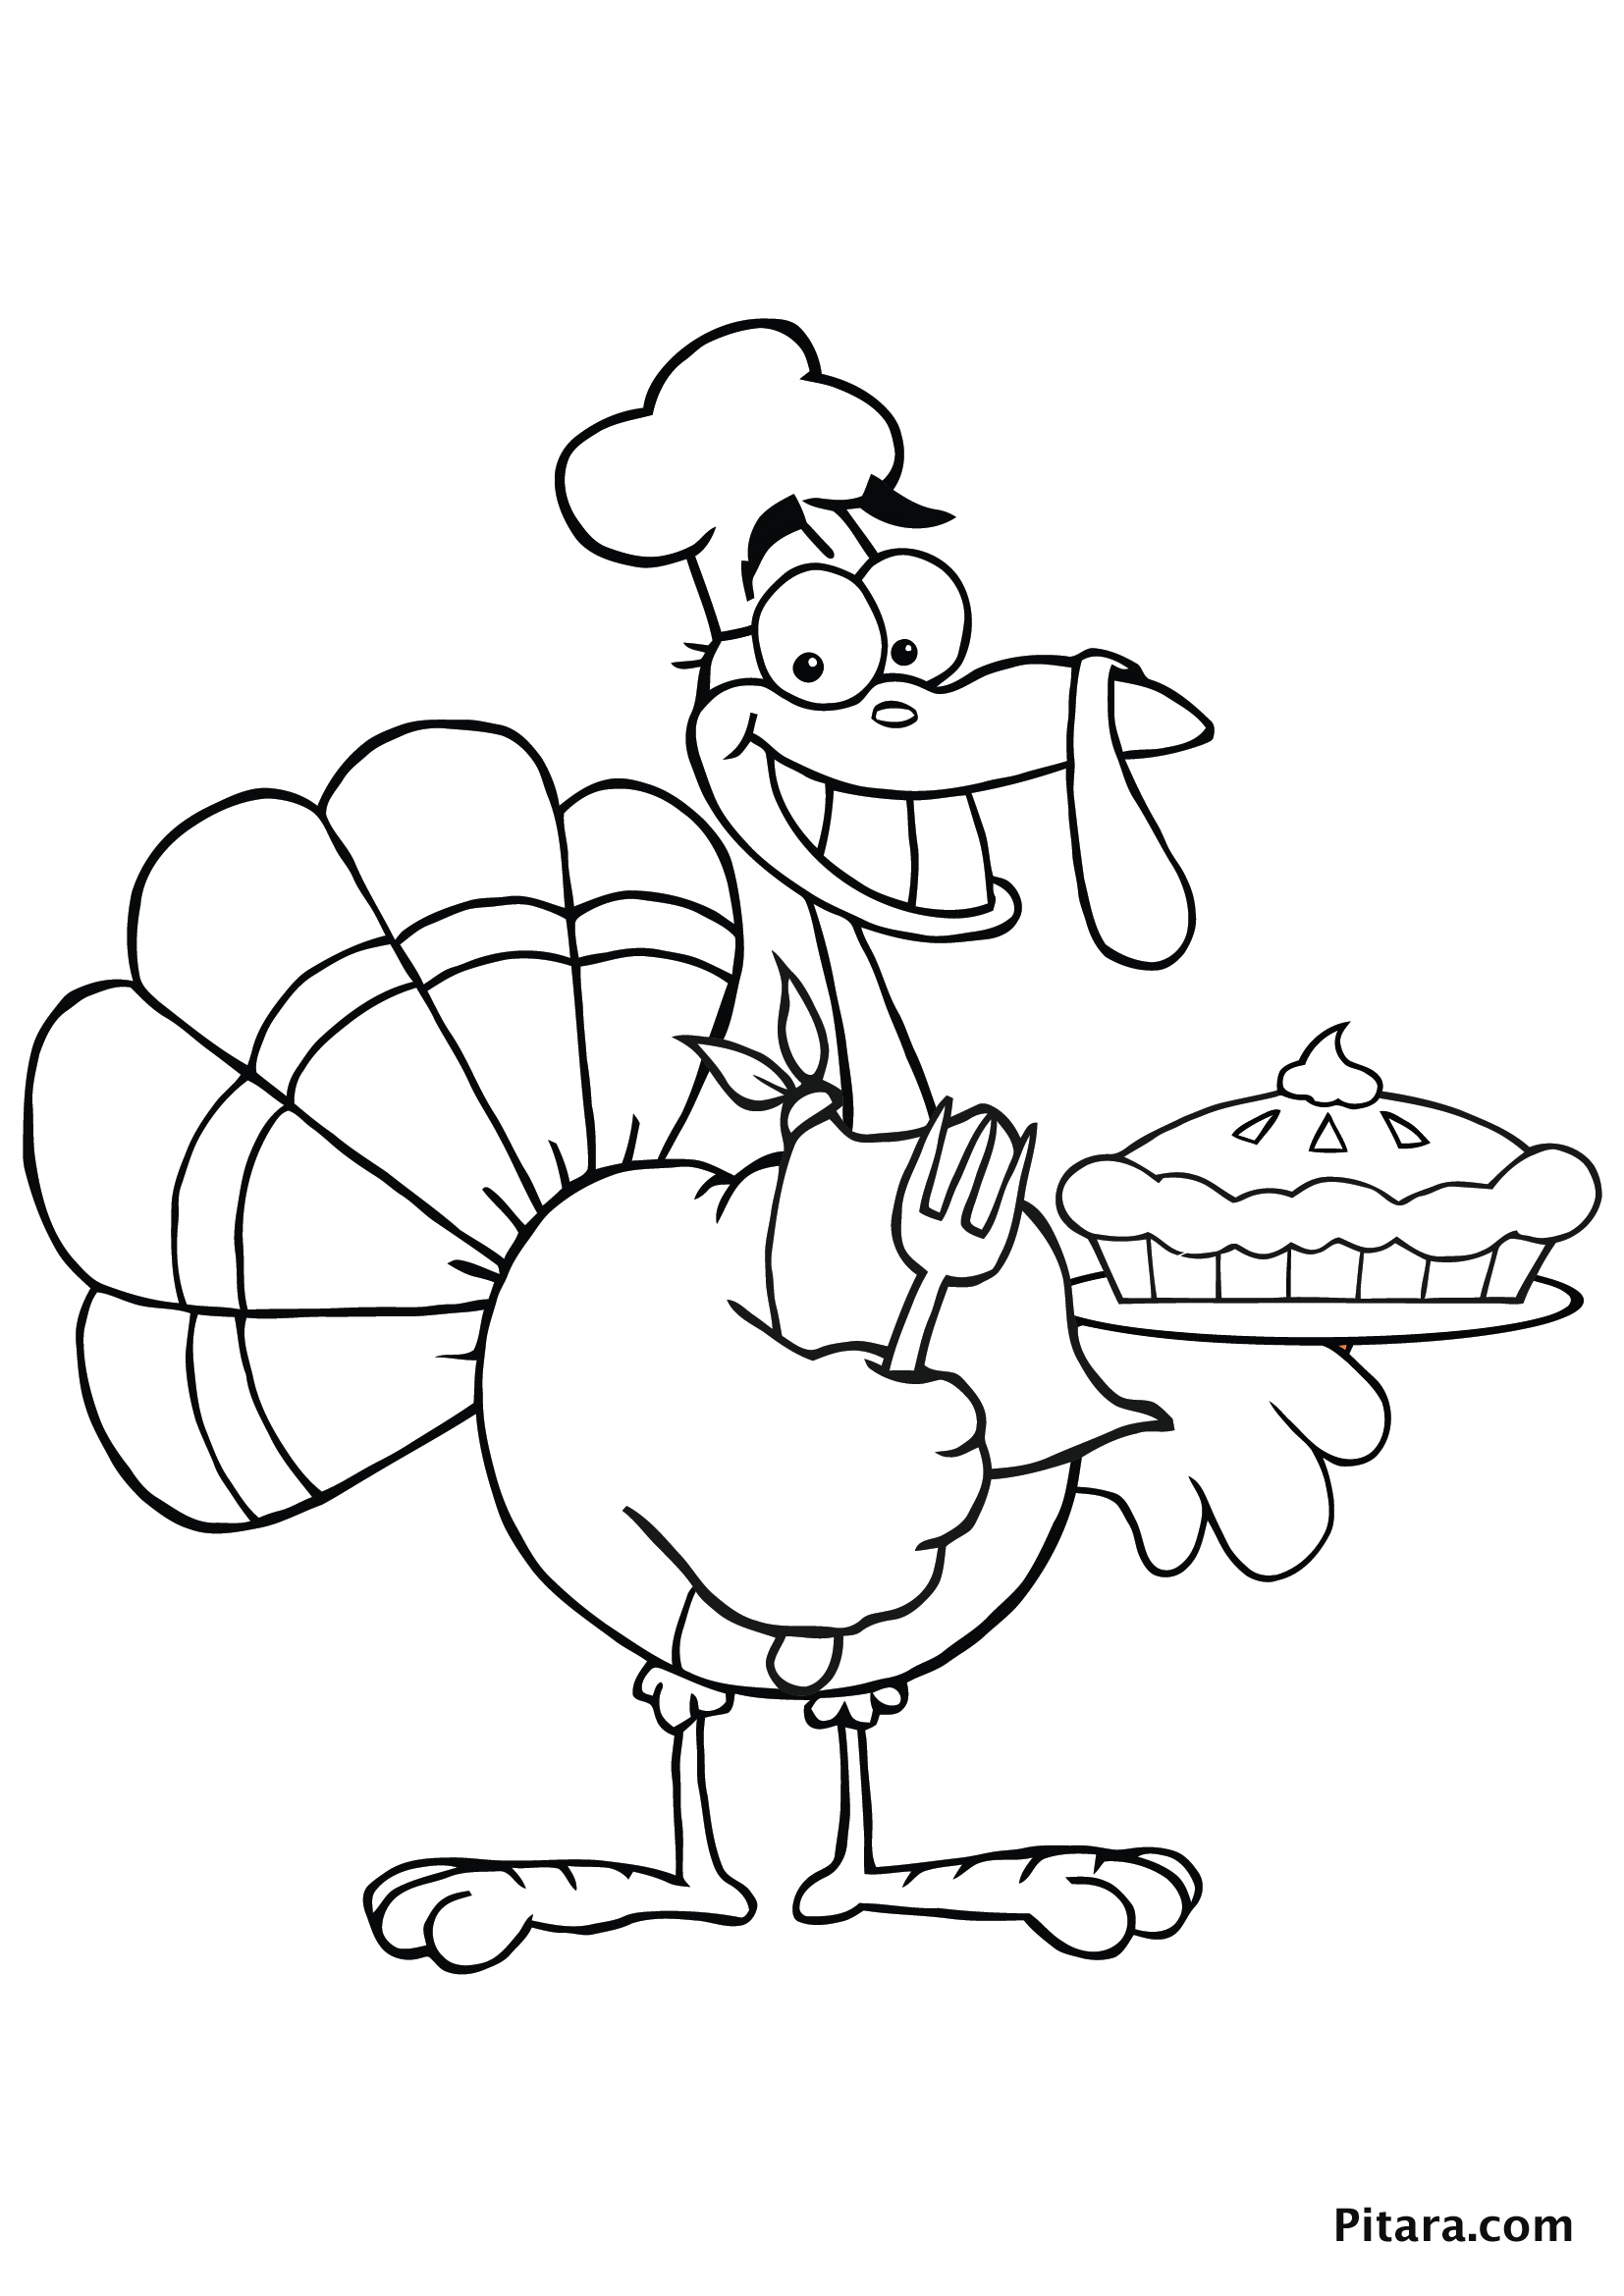 Turkey Coloring Pages for Kids – Pitara Kids Network